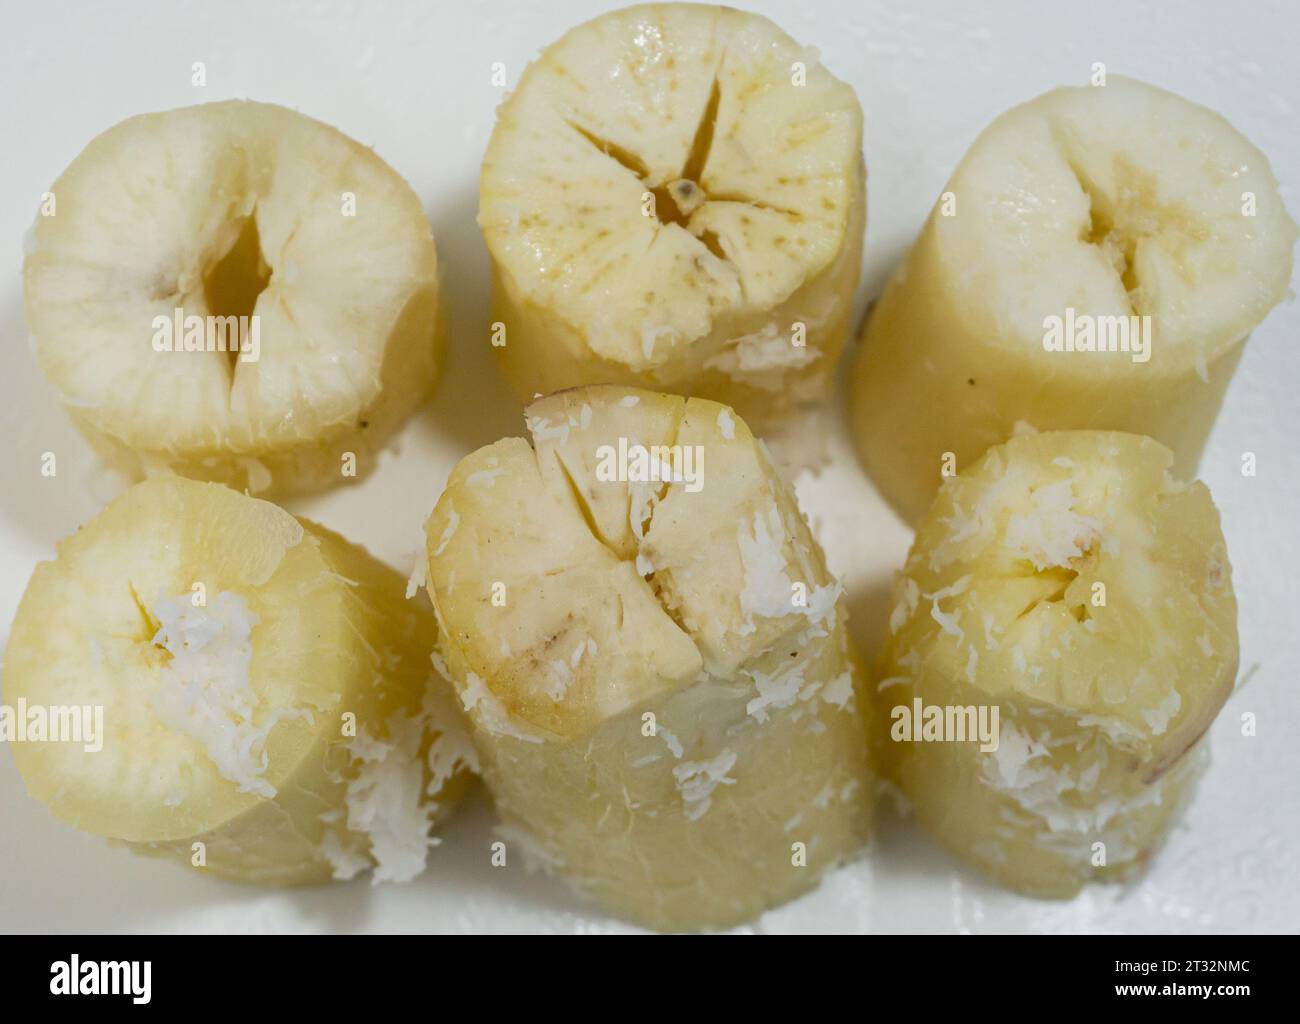 https://c8.alamy.com/comp/2T32NMC/singkong-rebus-or-boiled-cassava-accompanied-by-a-sprinkling-of-grated-coconut-isolated-on-a-white-background-top-view-angle-2T32NMC.jpg